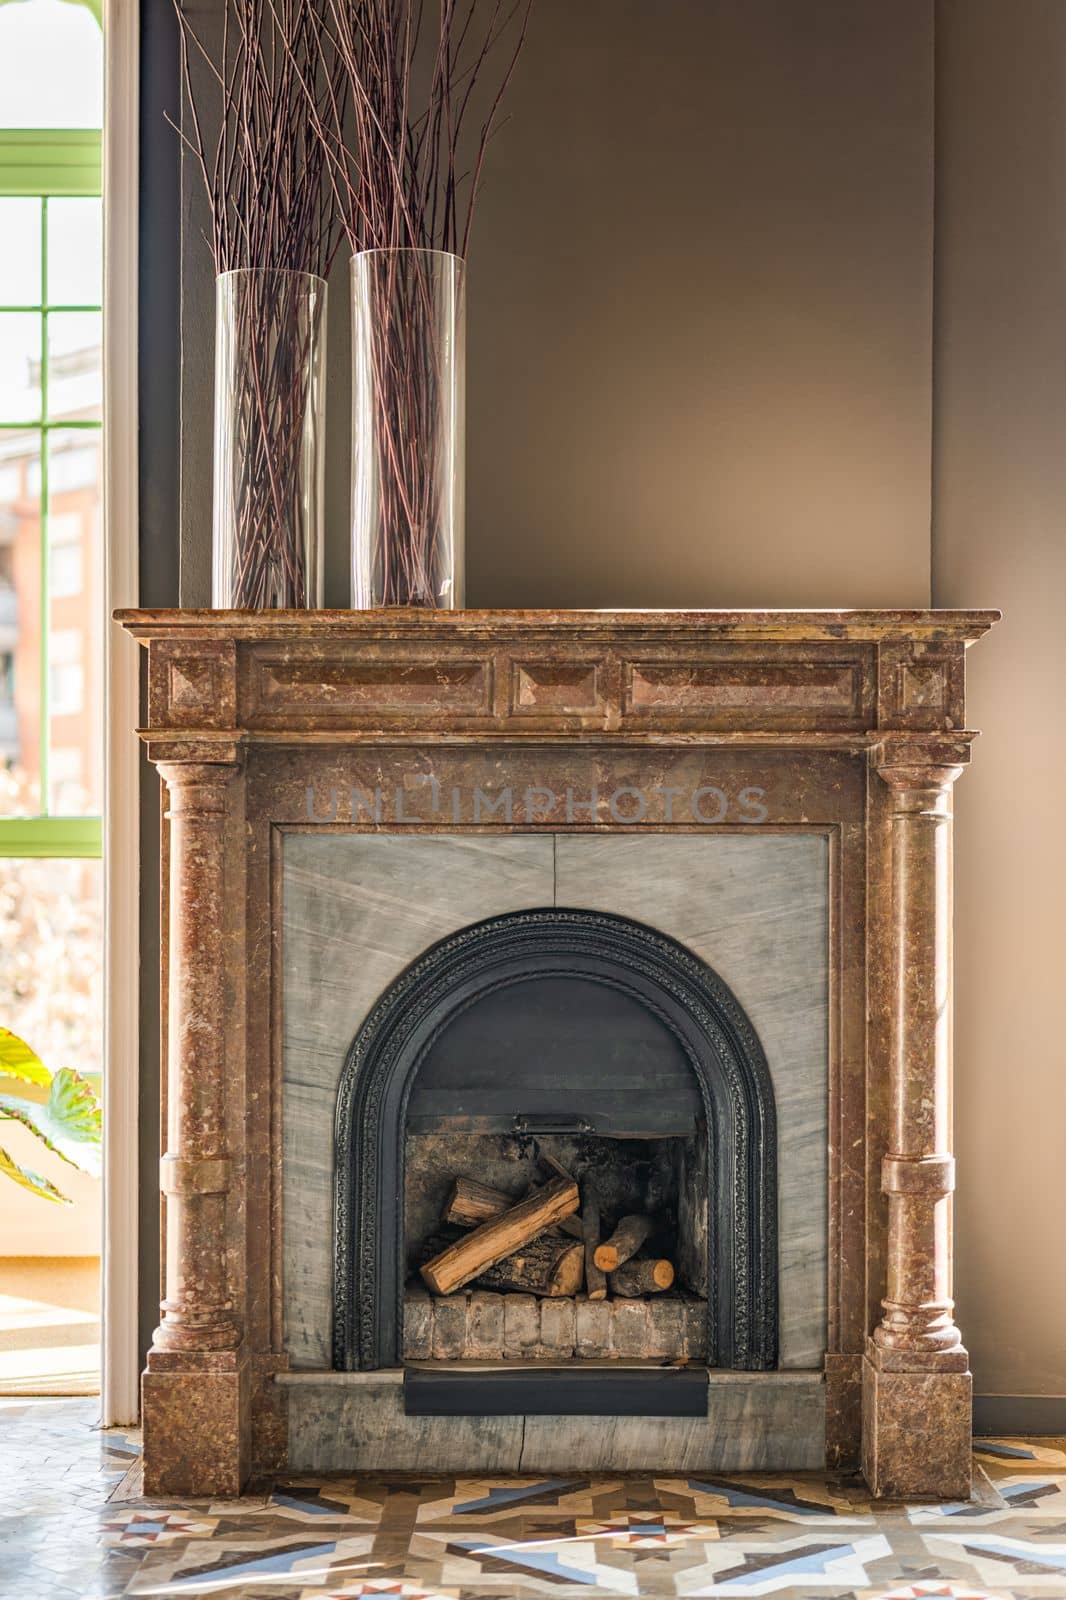 Fireplace made of heat-resistant bricks is lined with marble material of different textures and colors on top creating and majesty with notes of 18th century era. Part of an exclusive interior